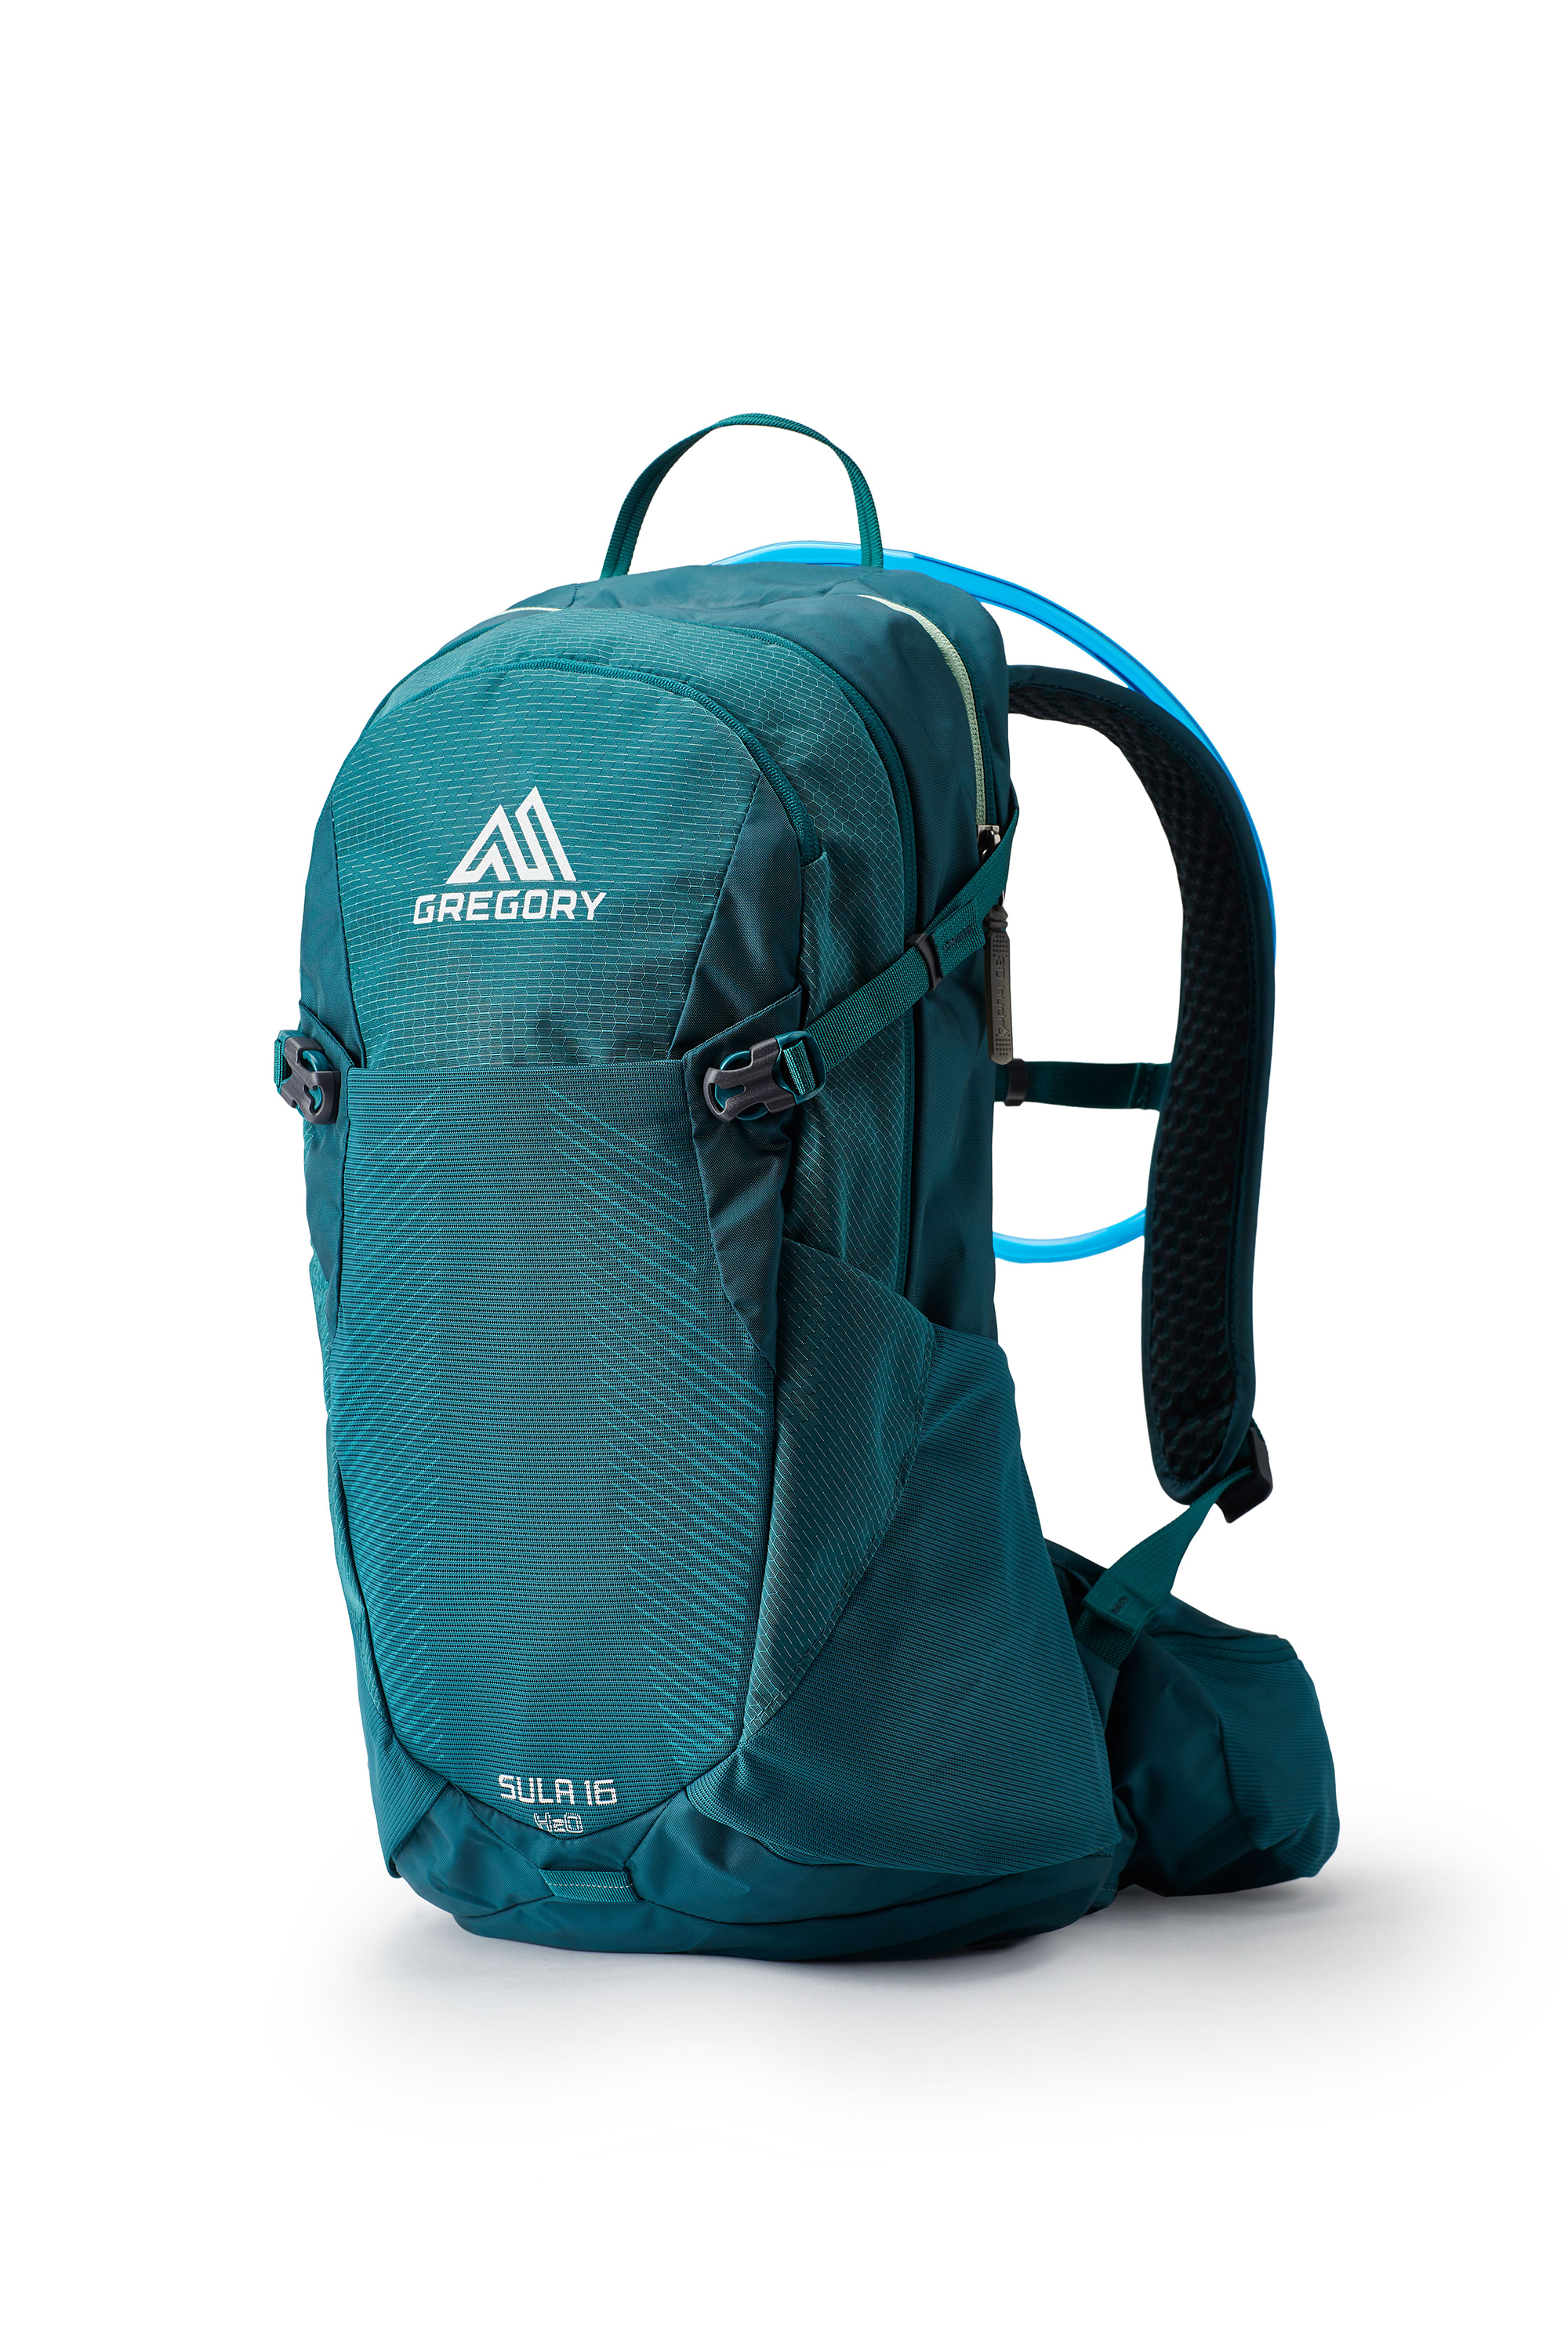 Gregory Sula 16 H2O Hydration Pack for Ladies - Antigua Green